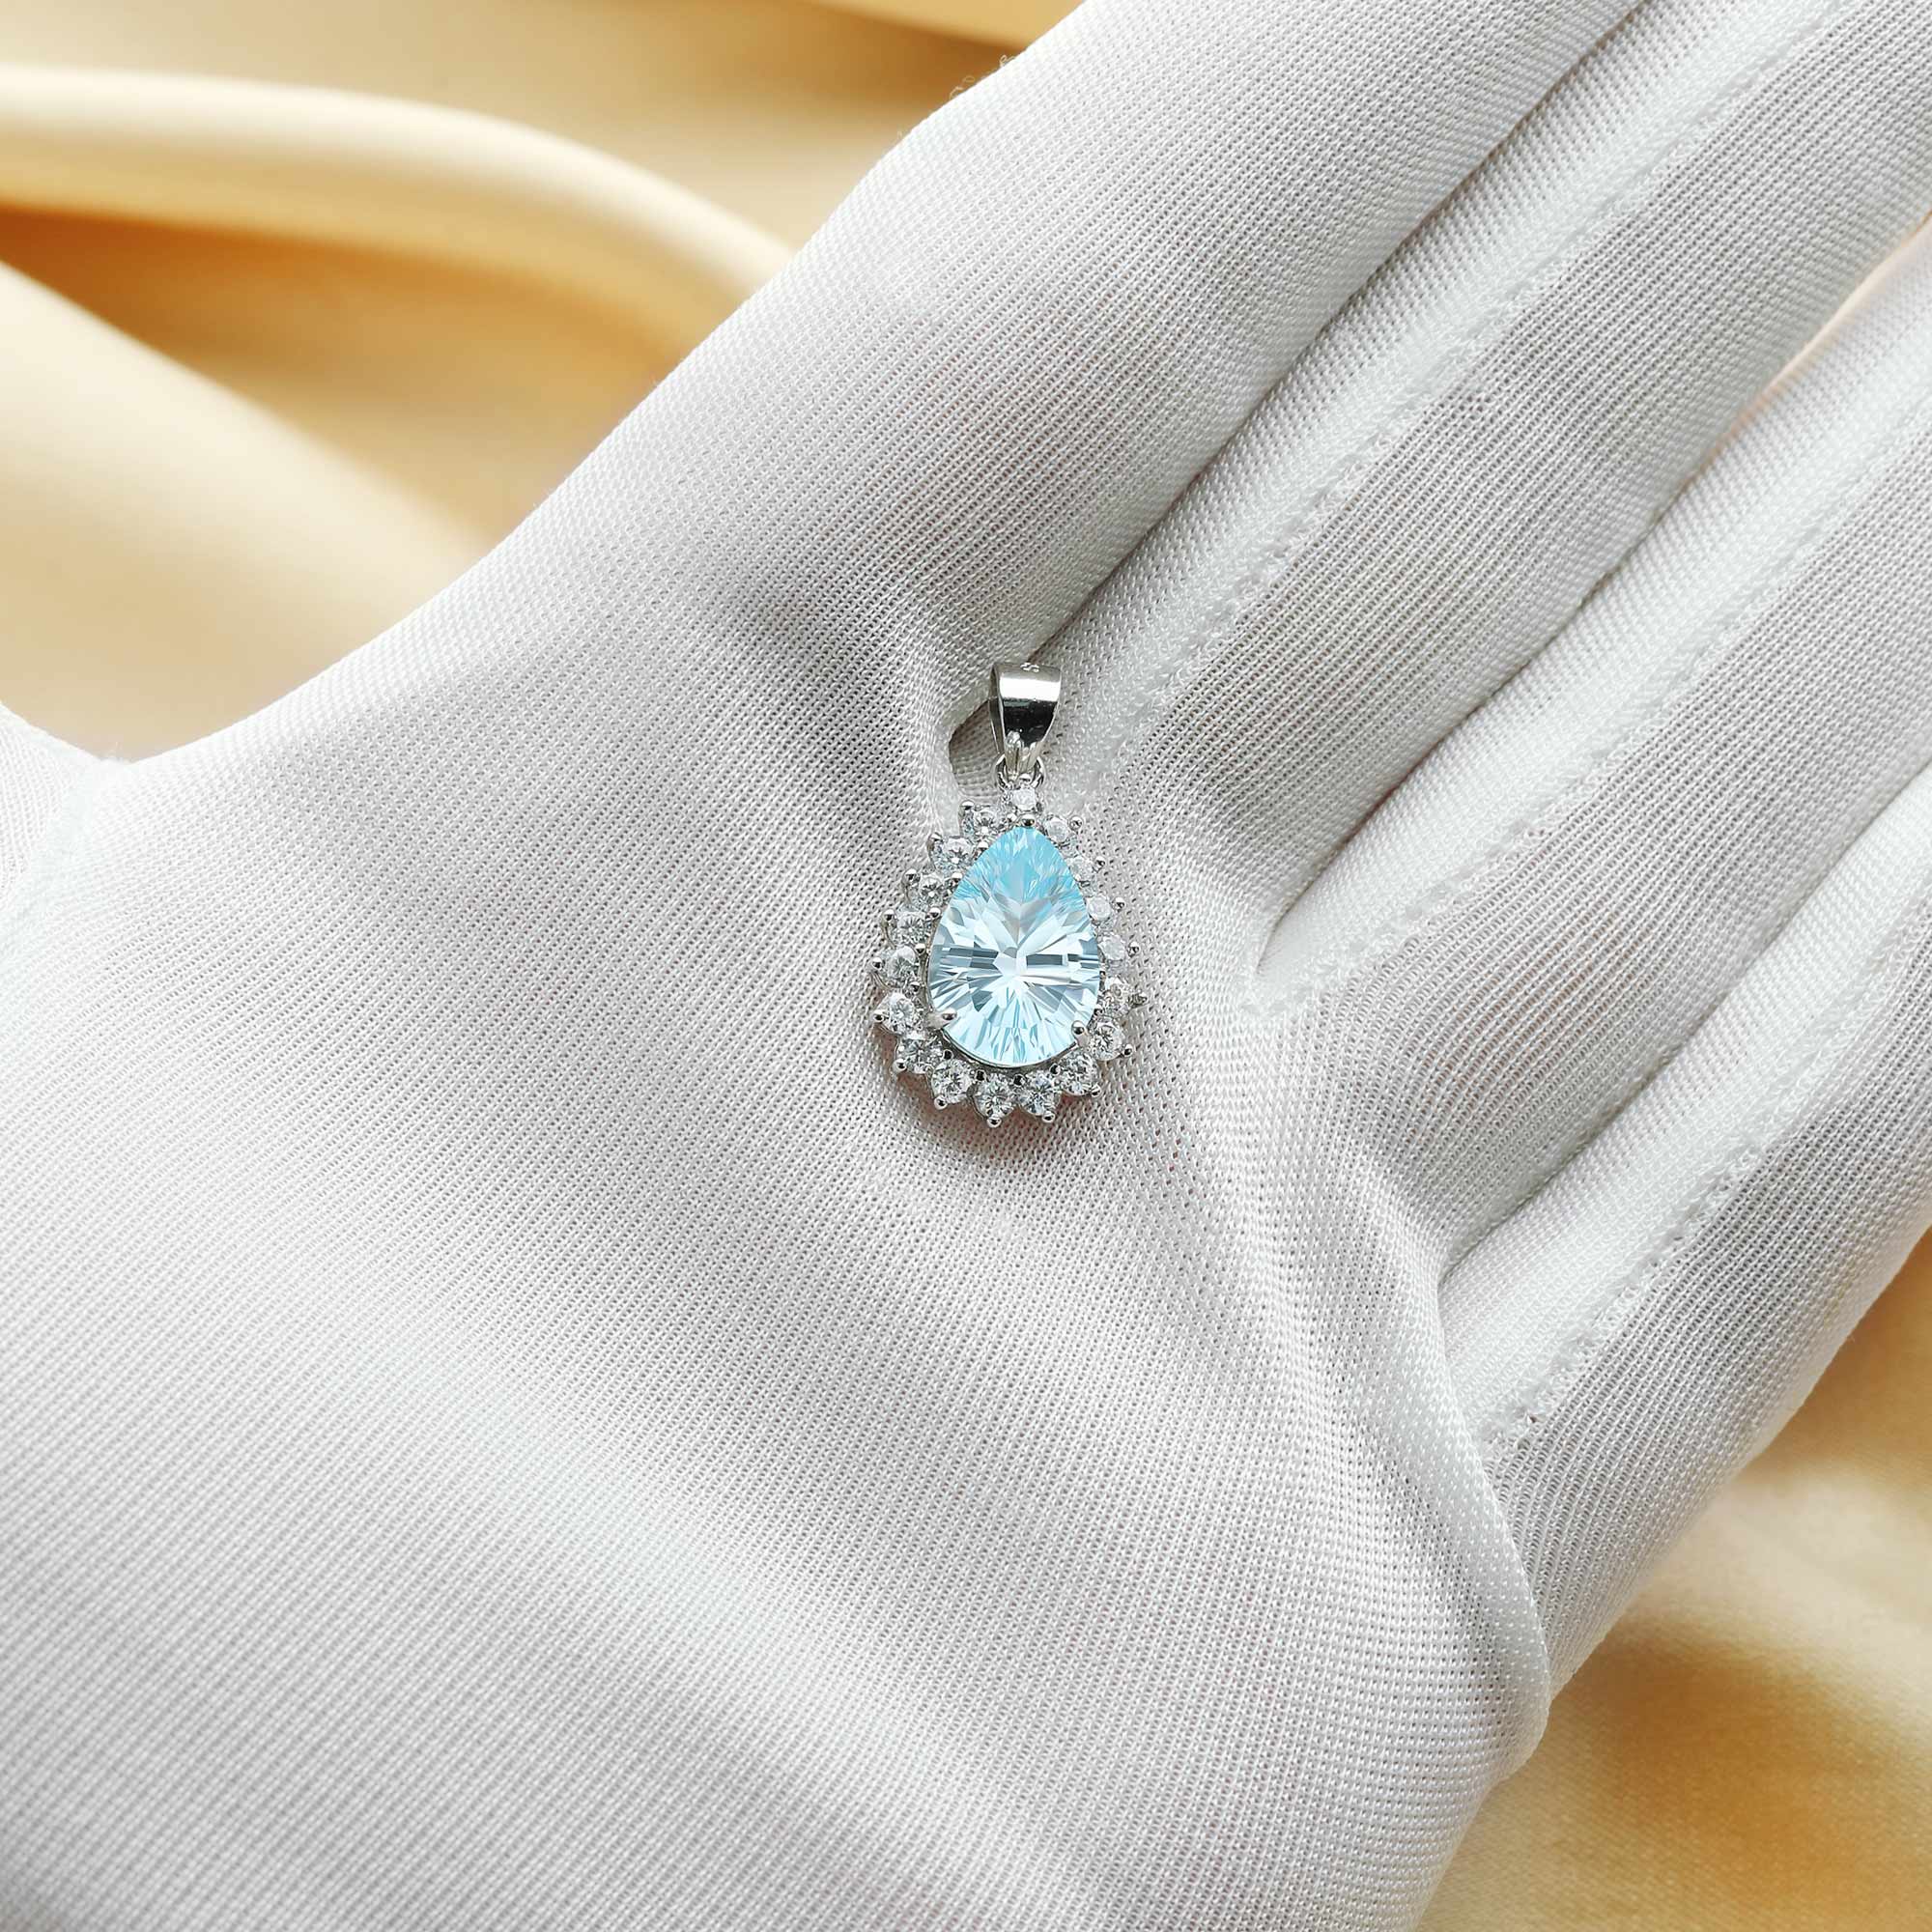 12x17MM Pear Birthstone Pendant Charm With 8x12MM Sky Blue Topaz,Solid 925 Sterling Silver Charm,November Birthstone Pendant 1431145 - Click Image to Close